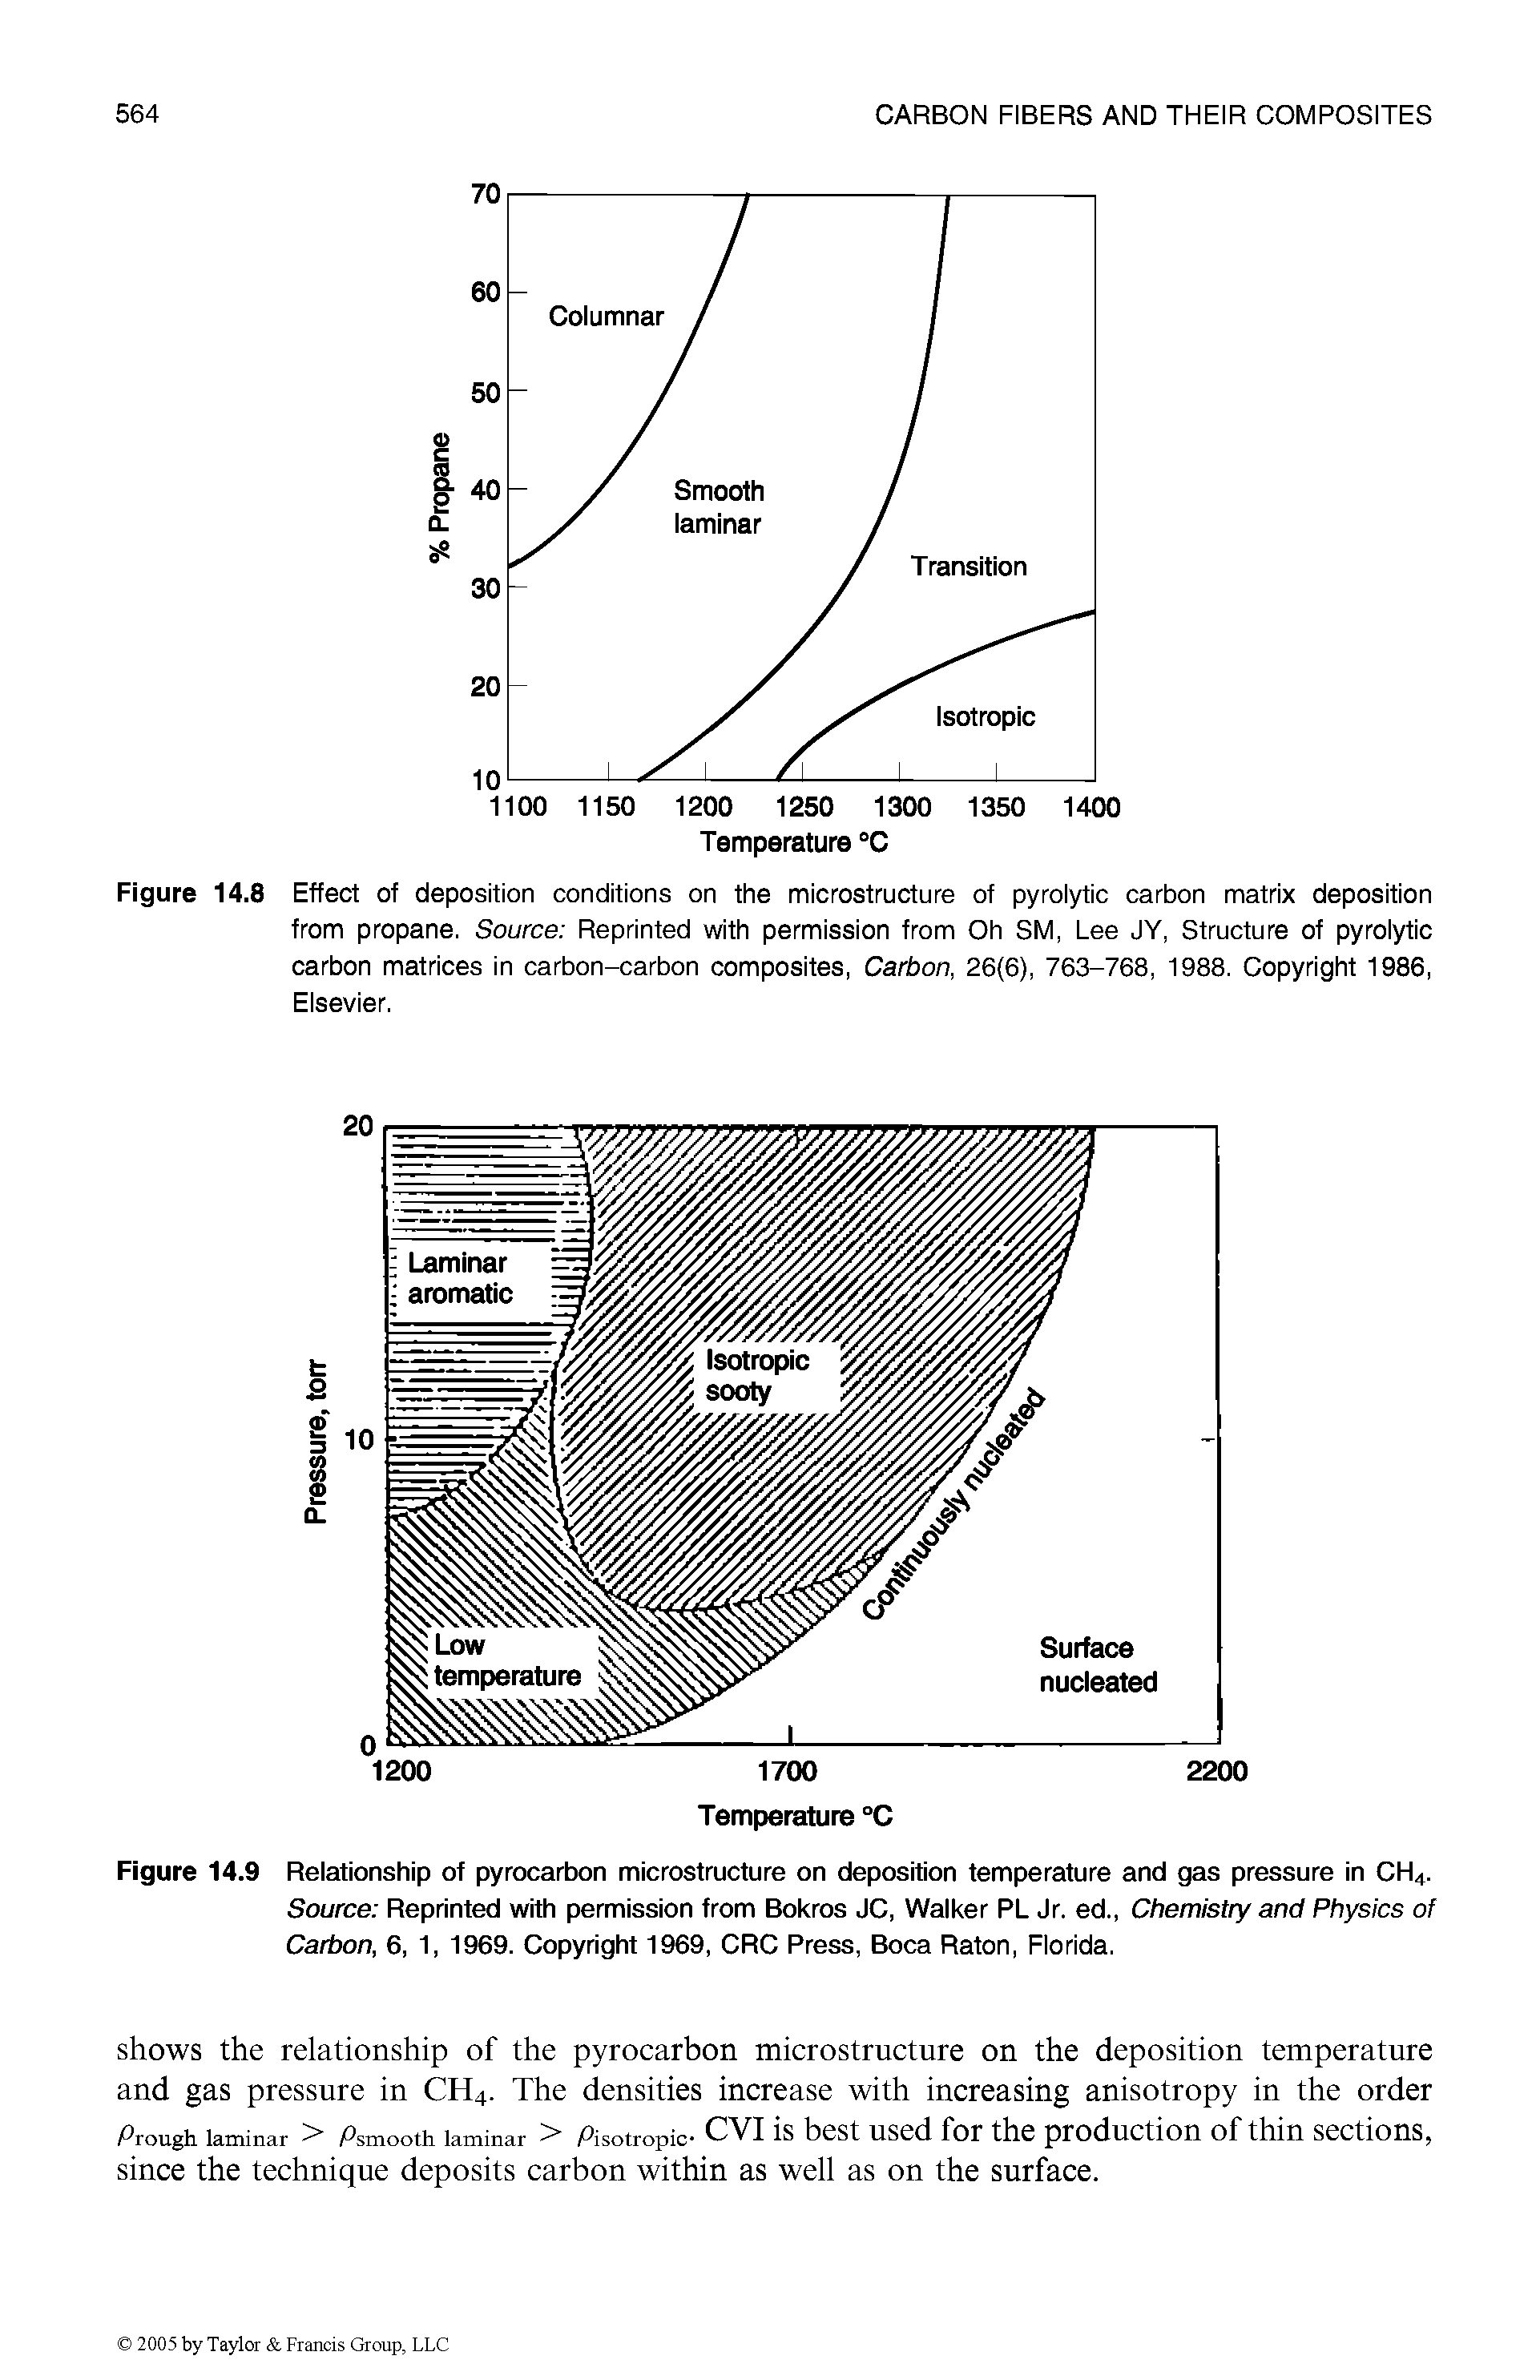 Figure 14.8 Effect of deposition conditions on the microstructure of pyrolytic carbon matrix deposition from propane. Source Reprinted with permission from Oh SM, Lee JY, Structure of pyrolytic carbon matrices in carbon-carbon composites, Carbon, 26(6), 763-768, 1988. Copyright 1986, Elsevier.